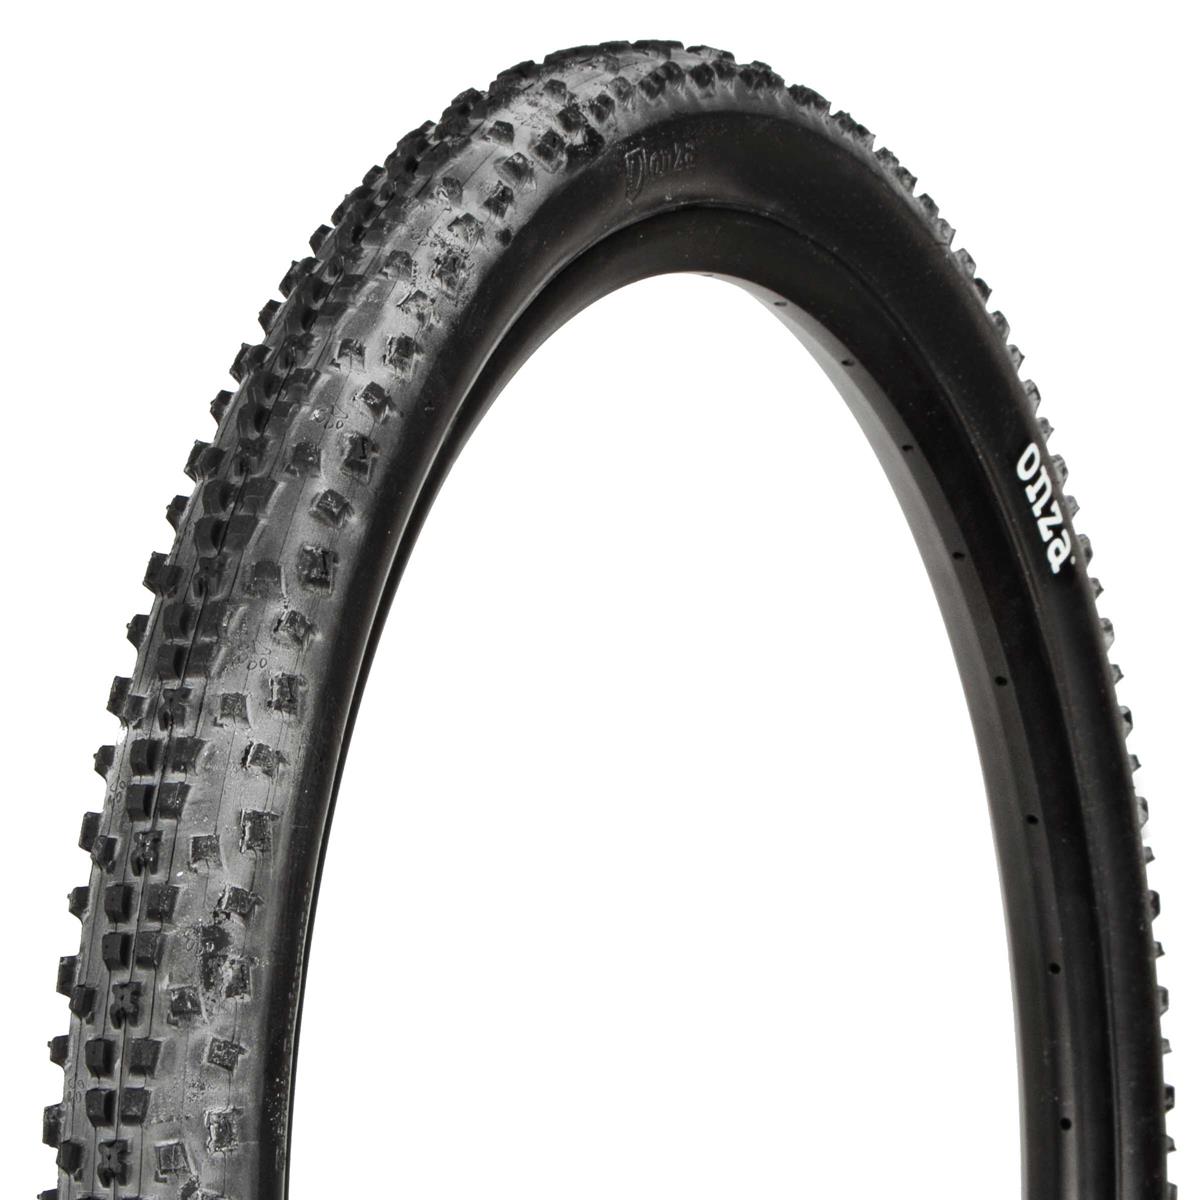 Onza MTB Tire Canis Black, 29 x 2.25 Inch, Tubeless Ready, 60 TPI, C3, 65a/55a, Foldable